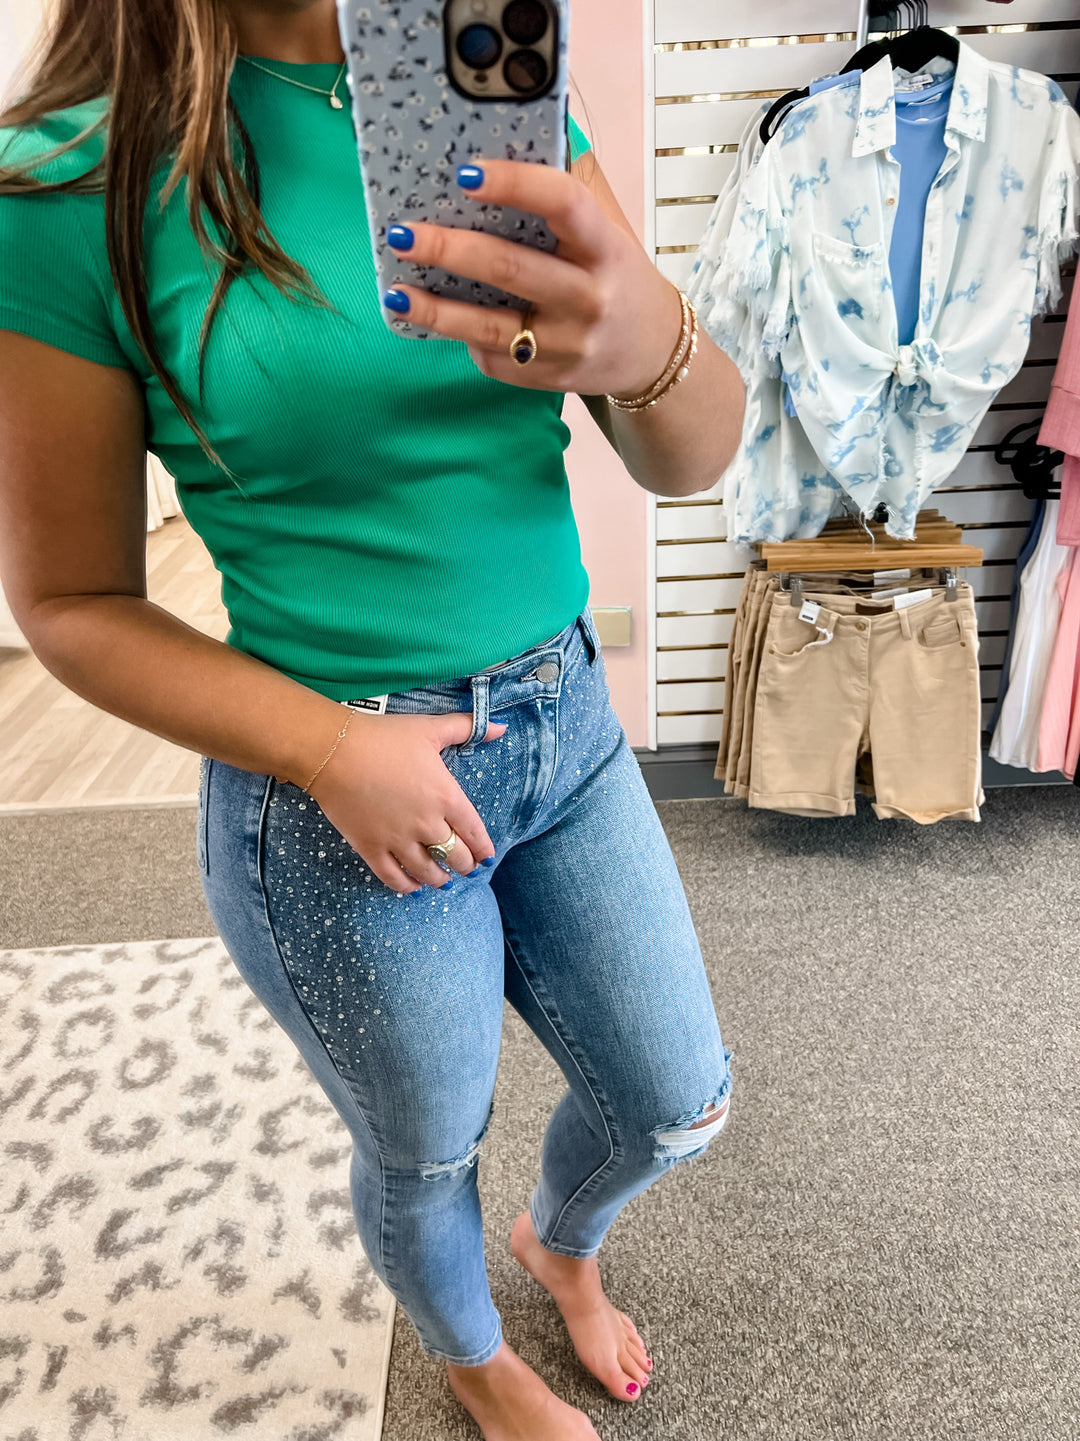 Rhinestone Destroyed Slim Cut Jeans - The Teal Antler Boutique